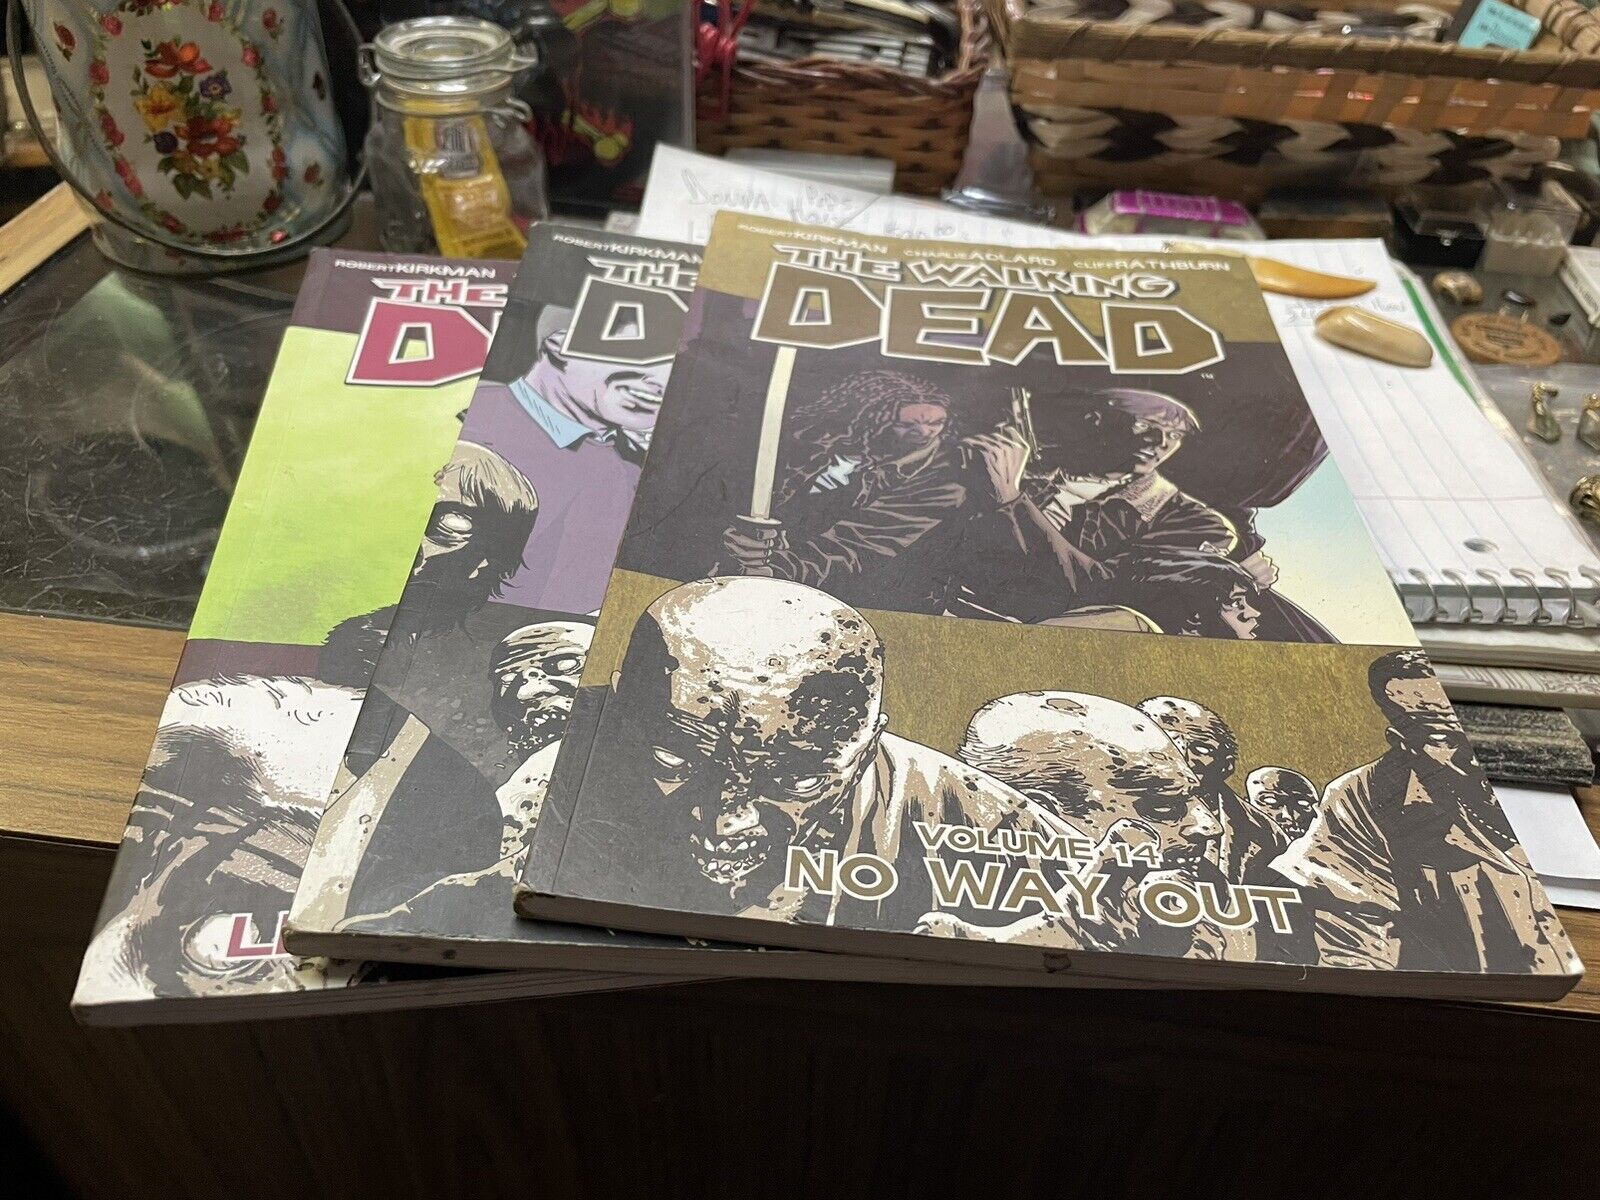 The Walking Dead Hardcover Book Lot - Near Complete Series With New Books